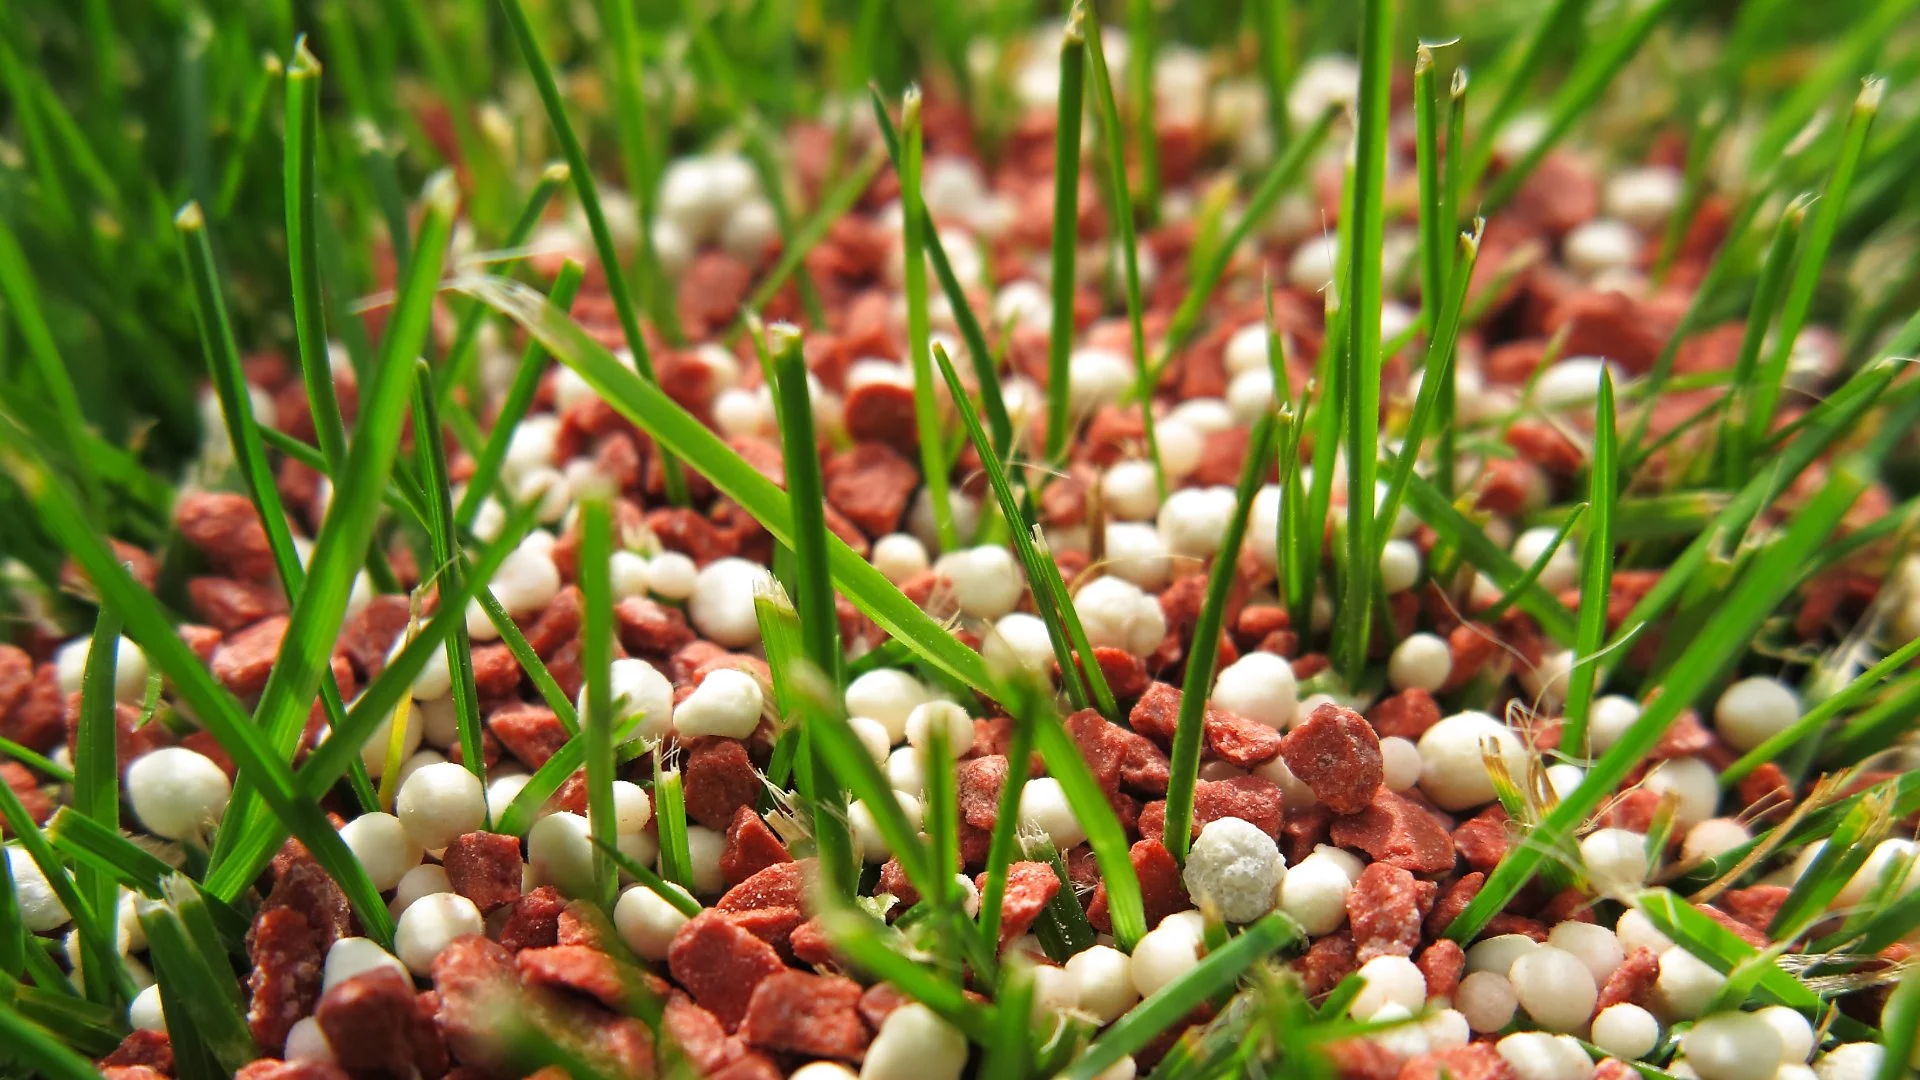 Don’t Overfertilize Your Lawn - It Can Have Some Negative Consequences!